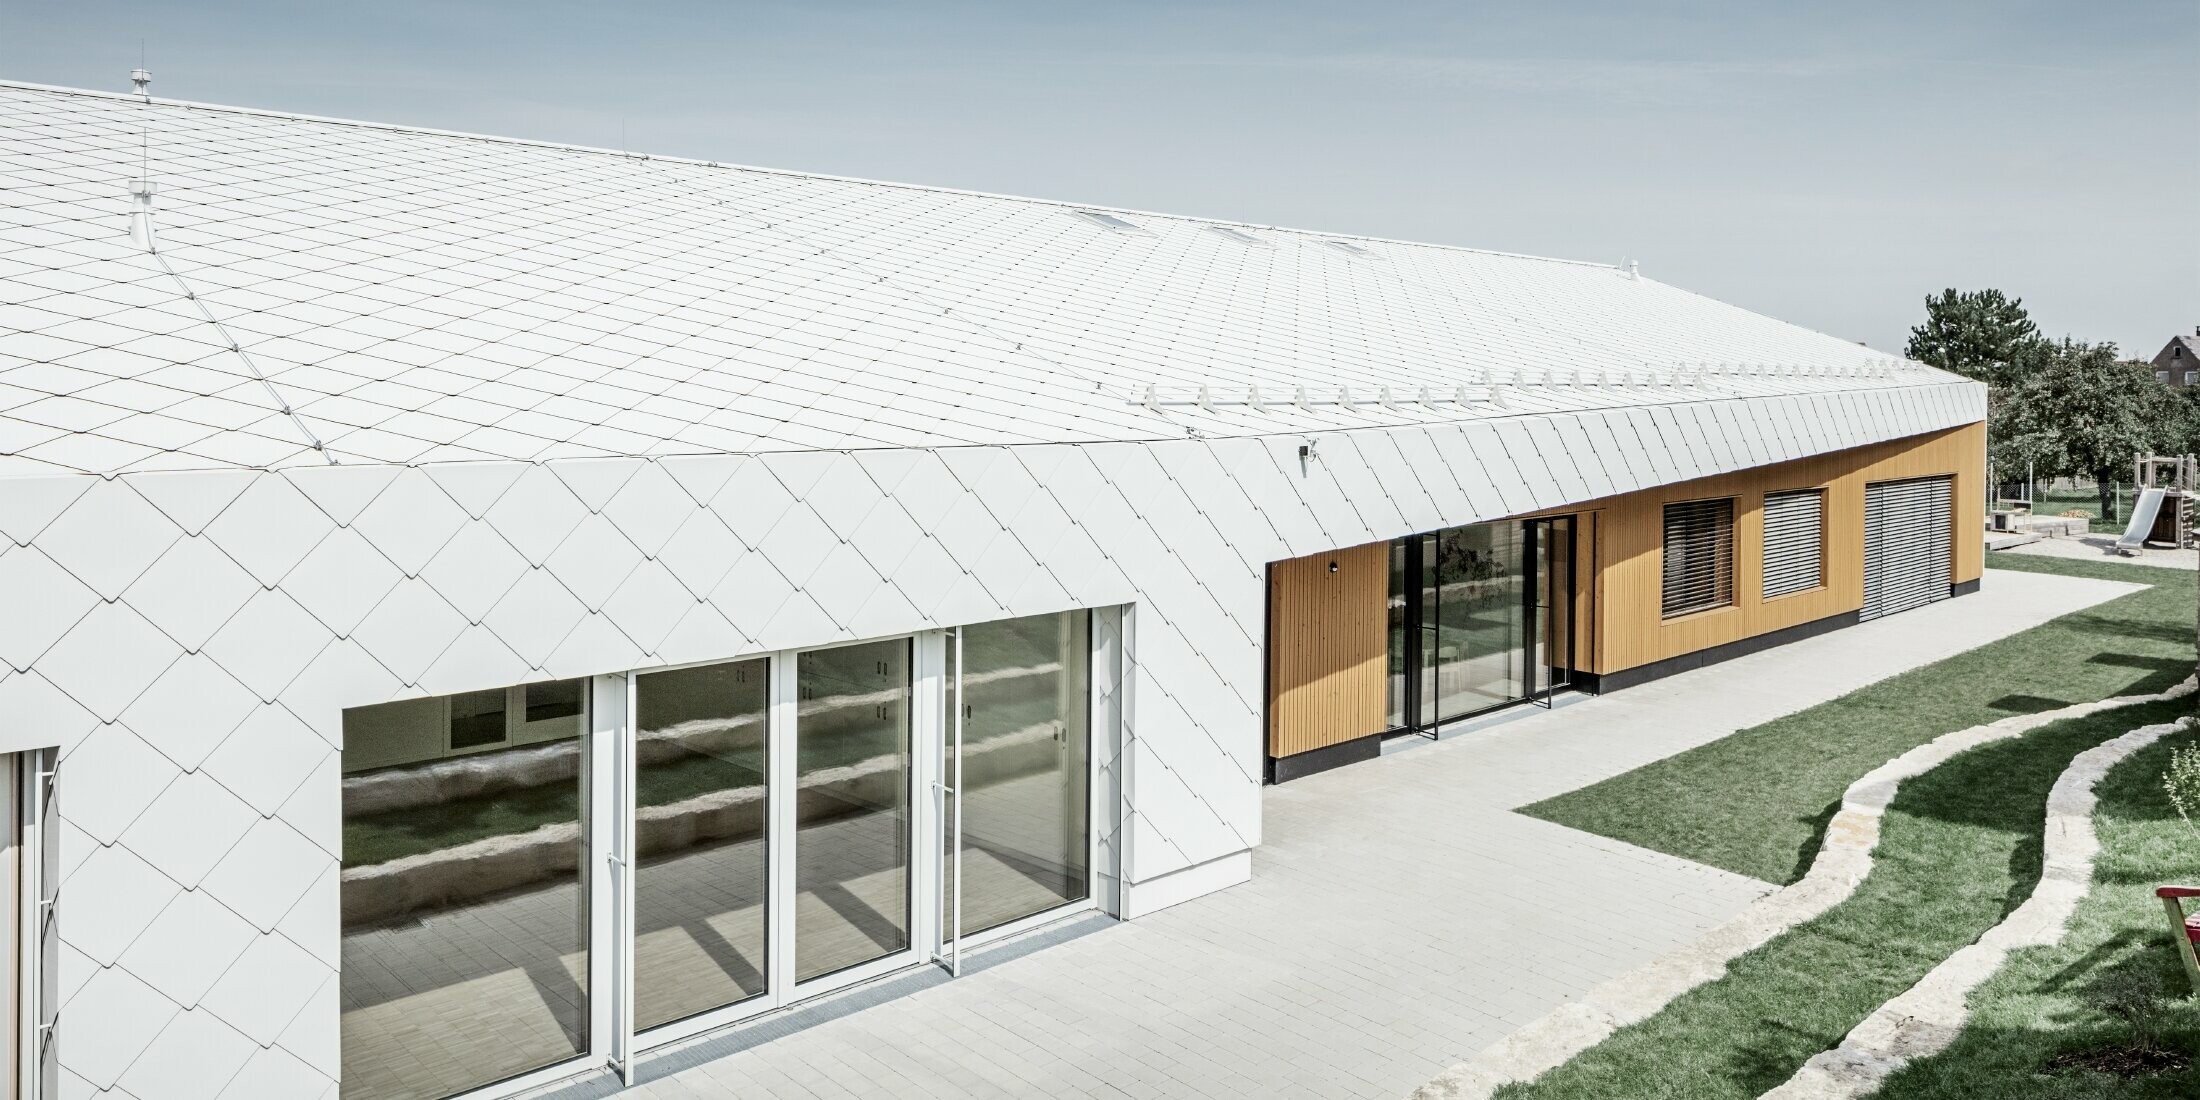 Nursery with the PREFA roof and façade tiles 44 in Prefa white, the roof surface extends over the façade; large window areas